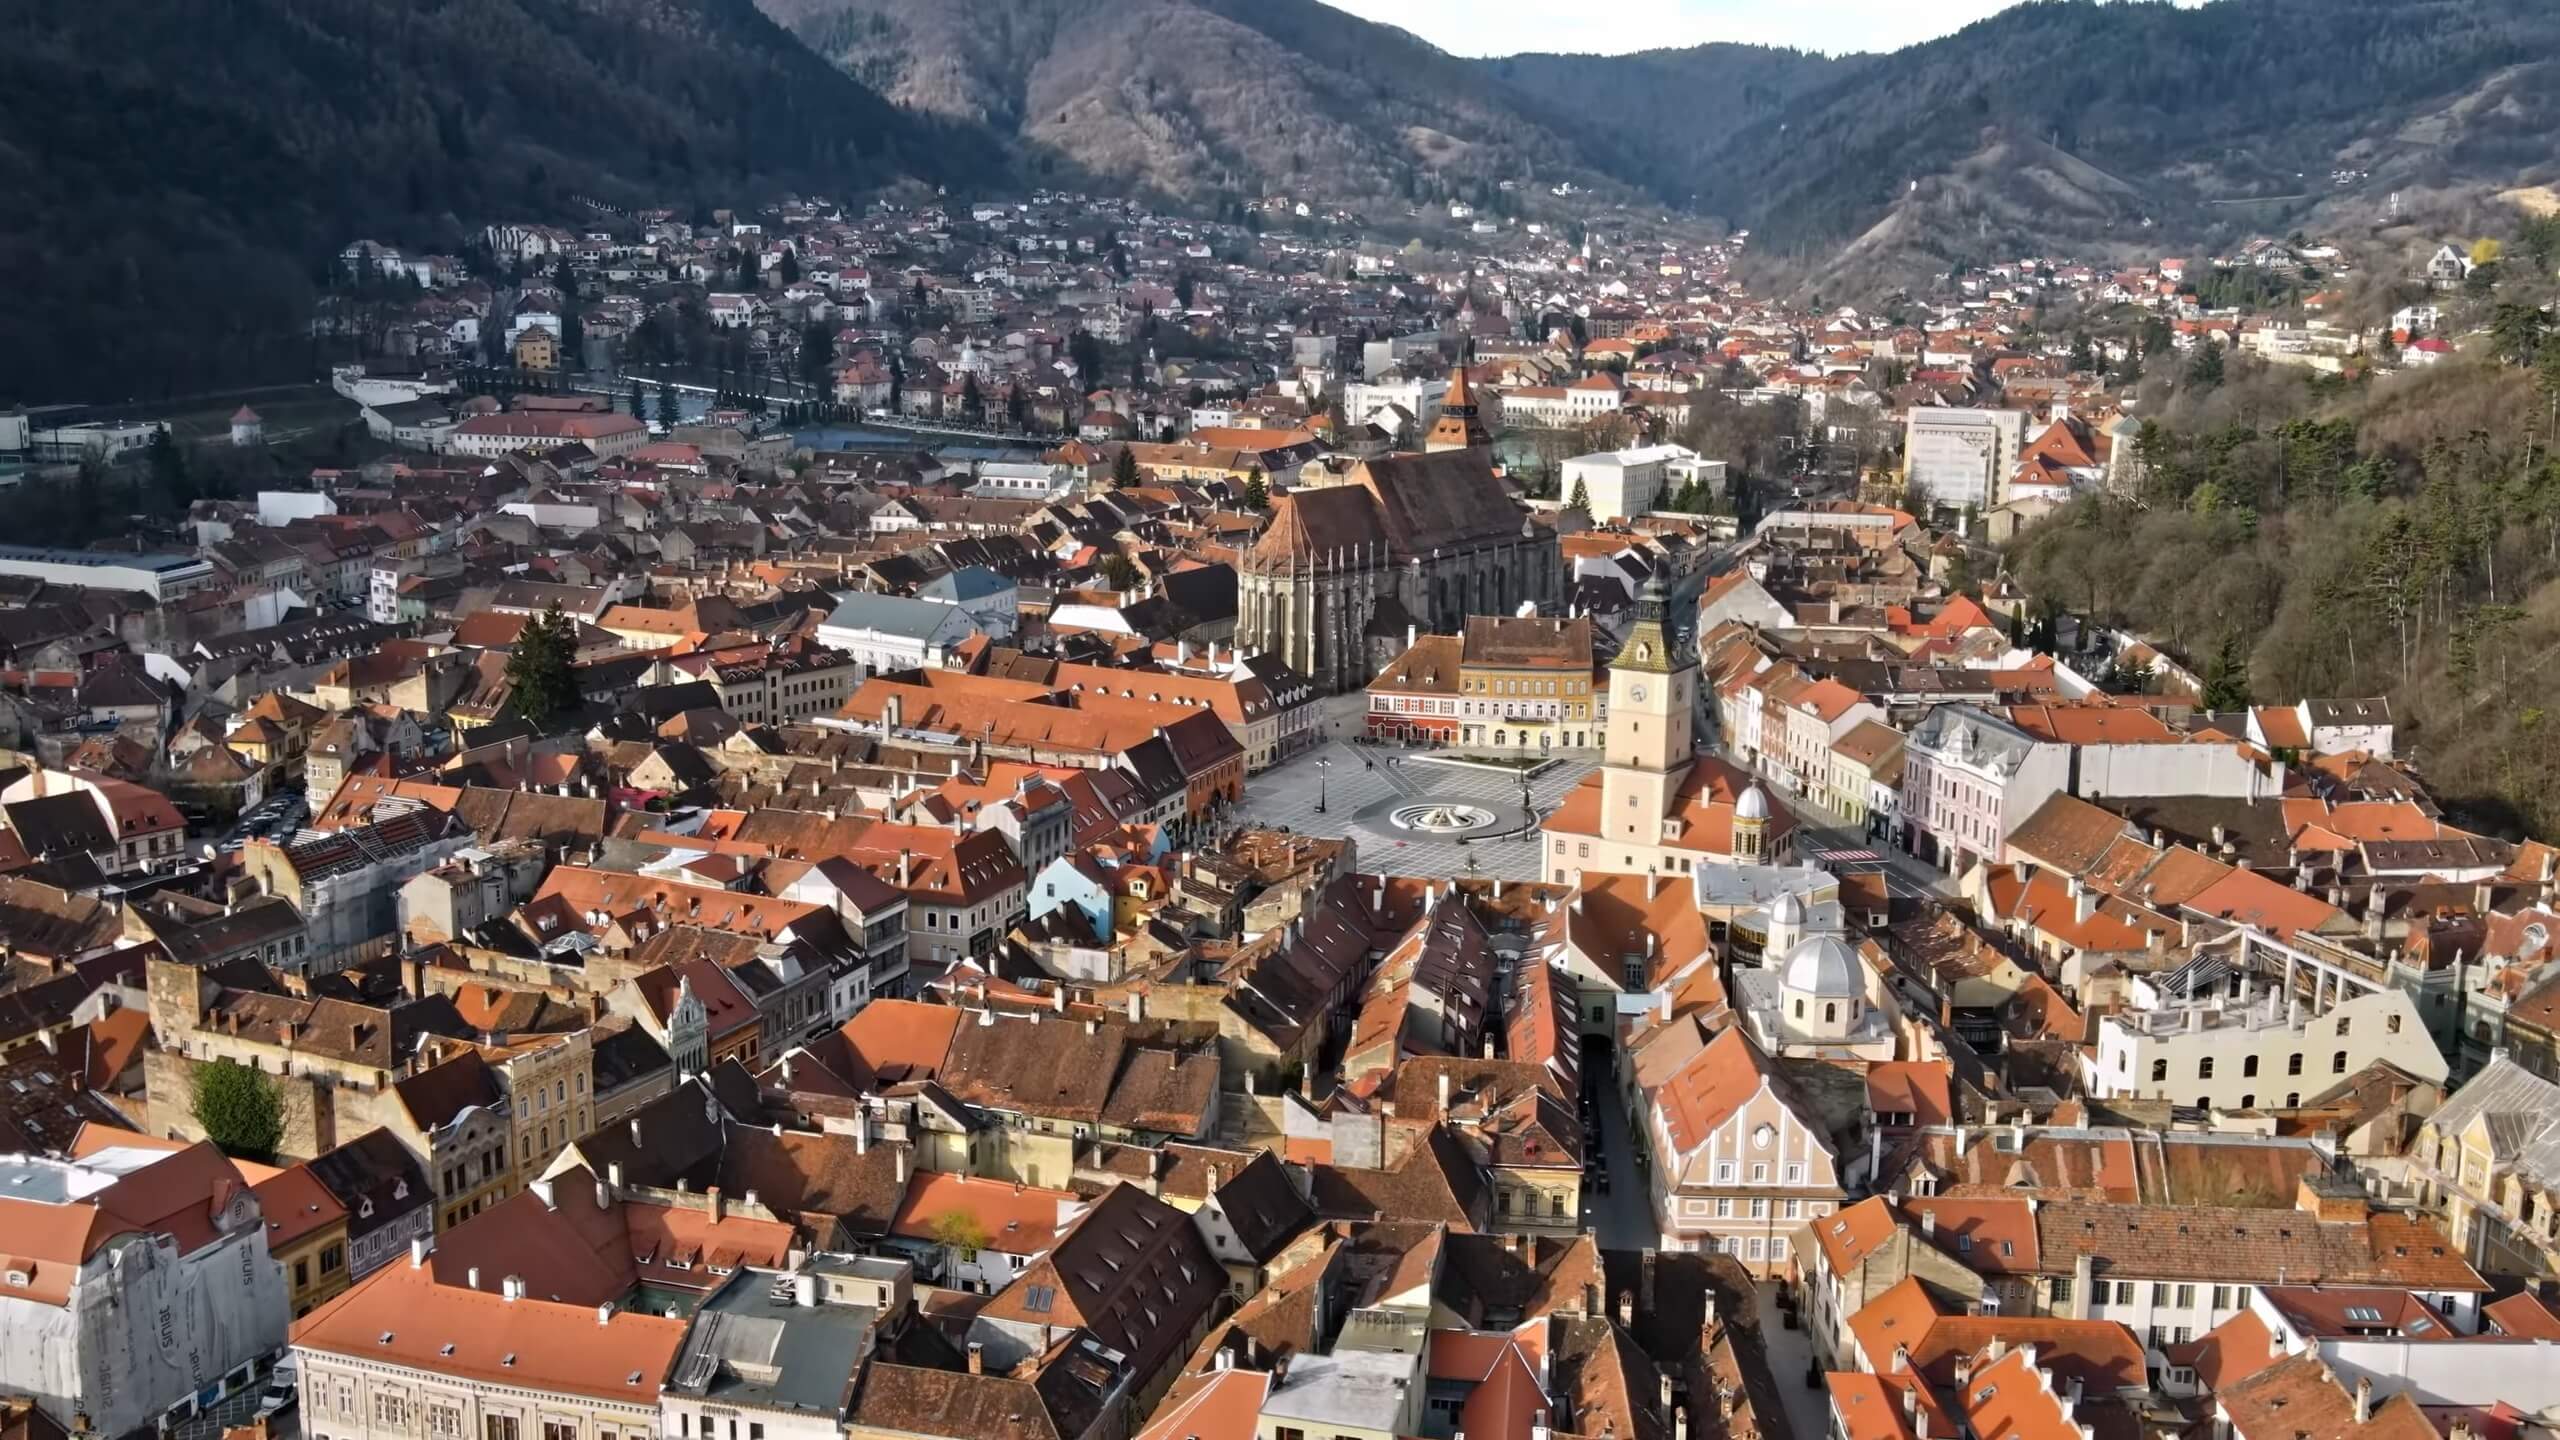 Brasov-Romania - Cheapest Countries in the world